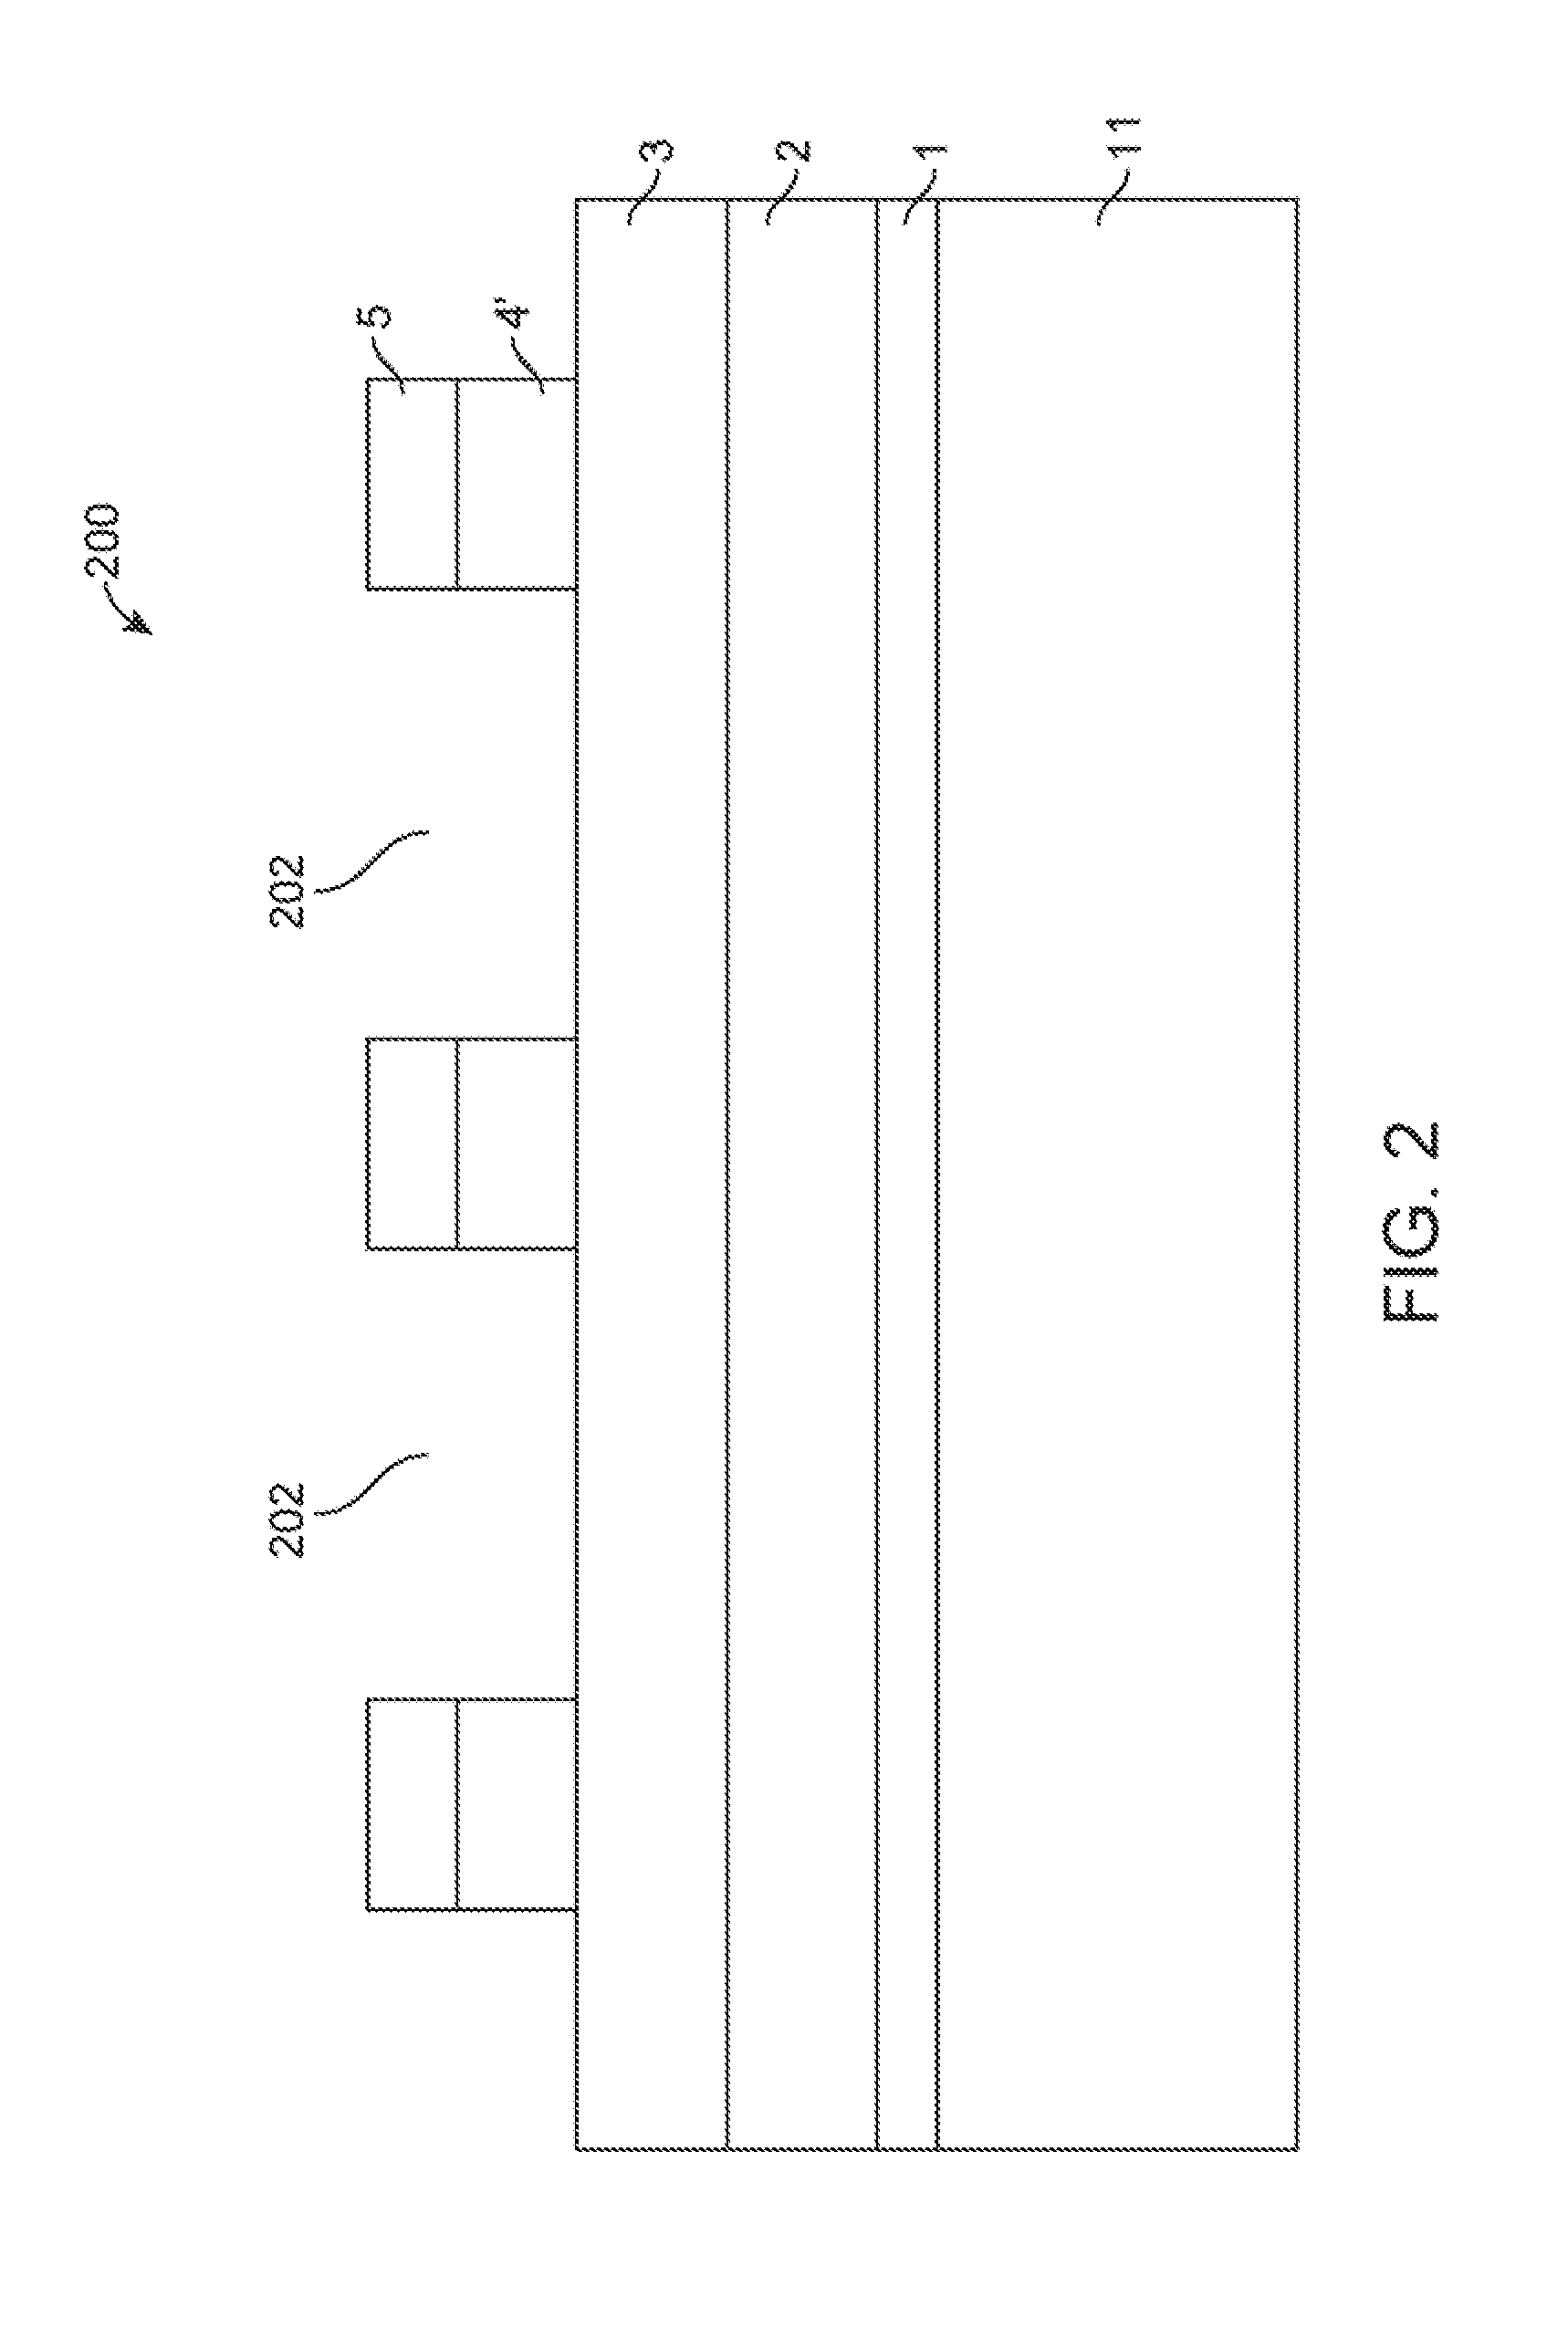 Vialess memory structure and method of manufacturing same